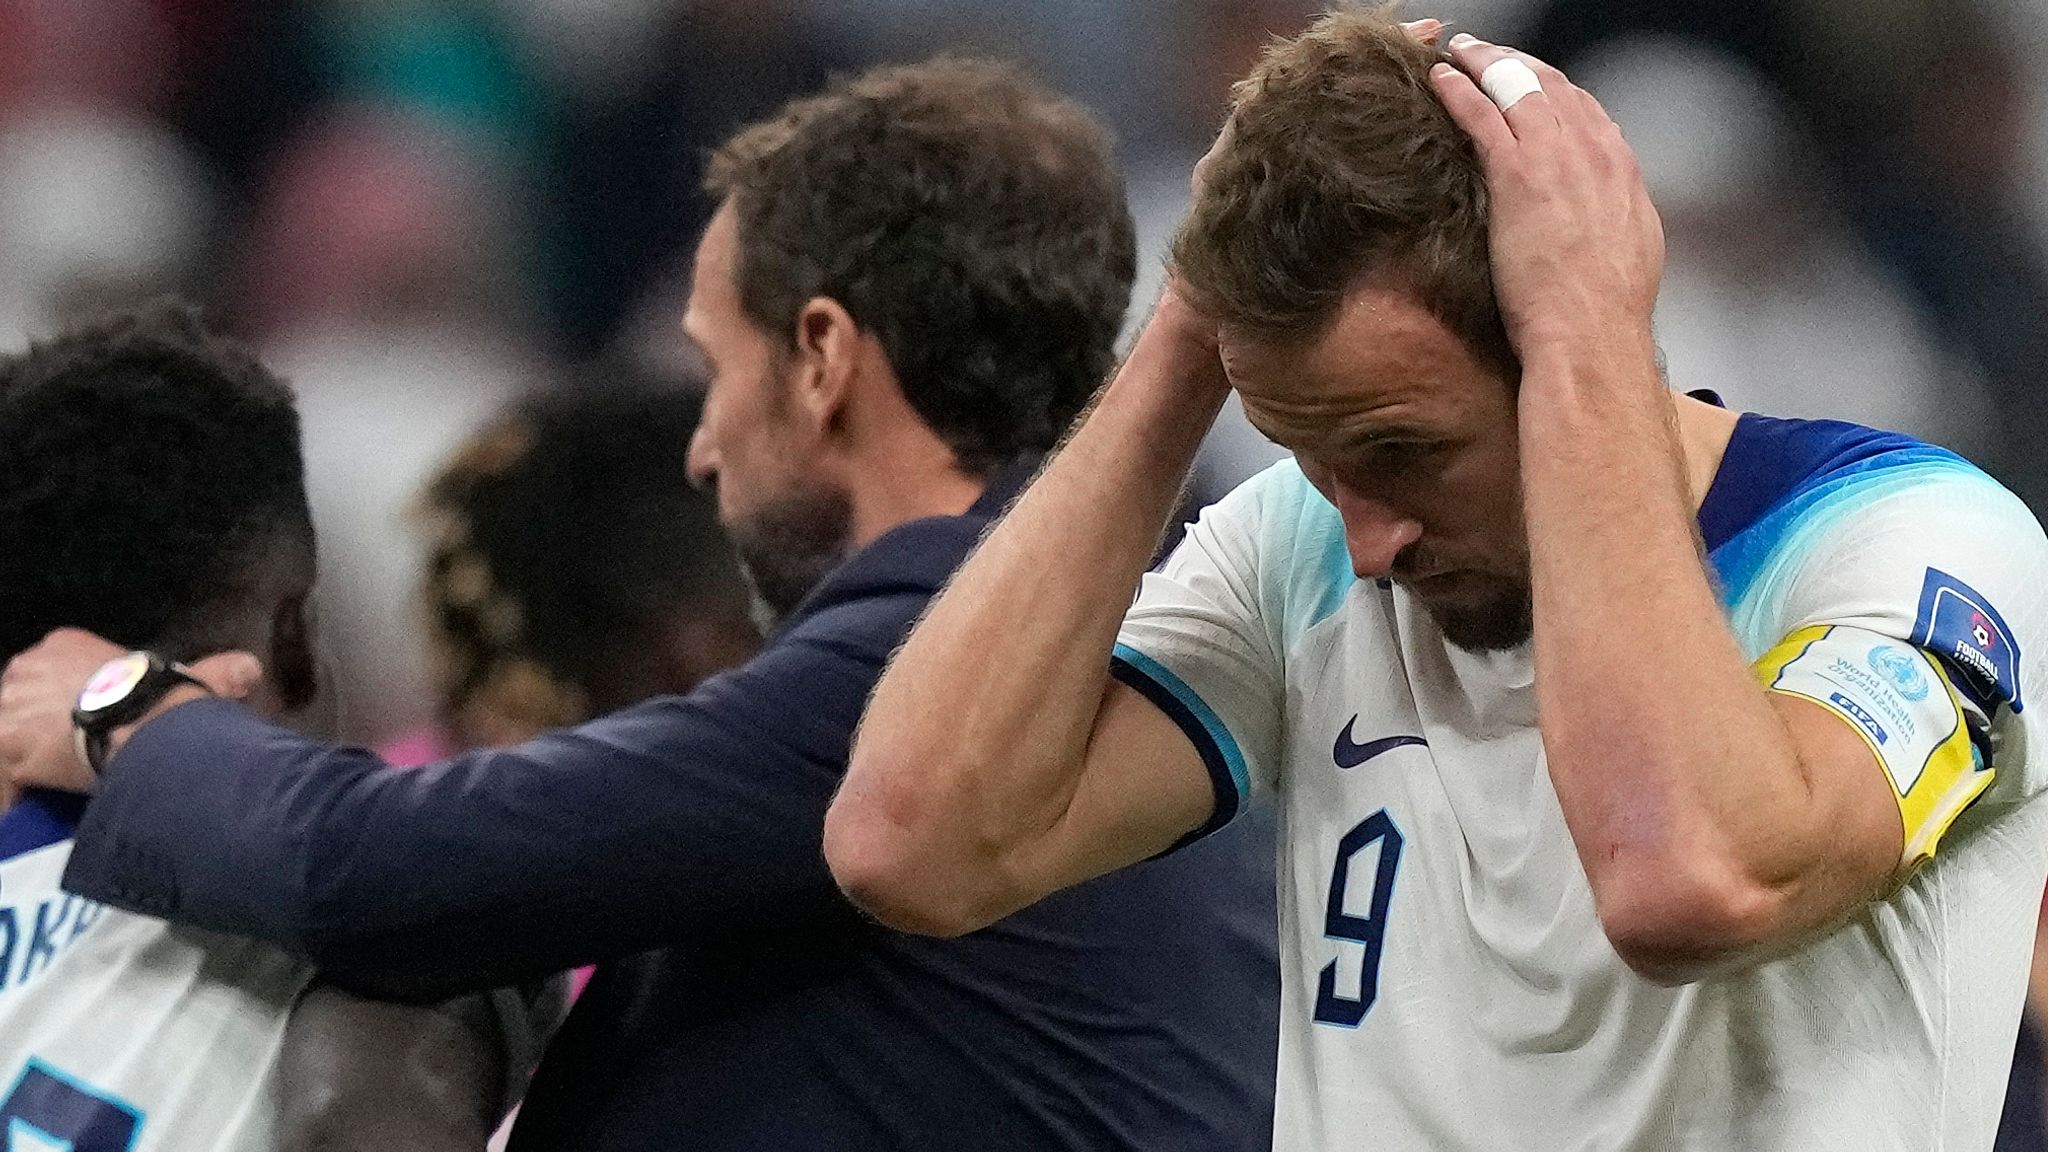 England vs France saw massive online abuse spike during World Cup, says FIFA report countering hate speech Football News Sky Sports